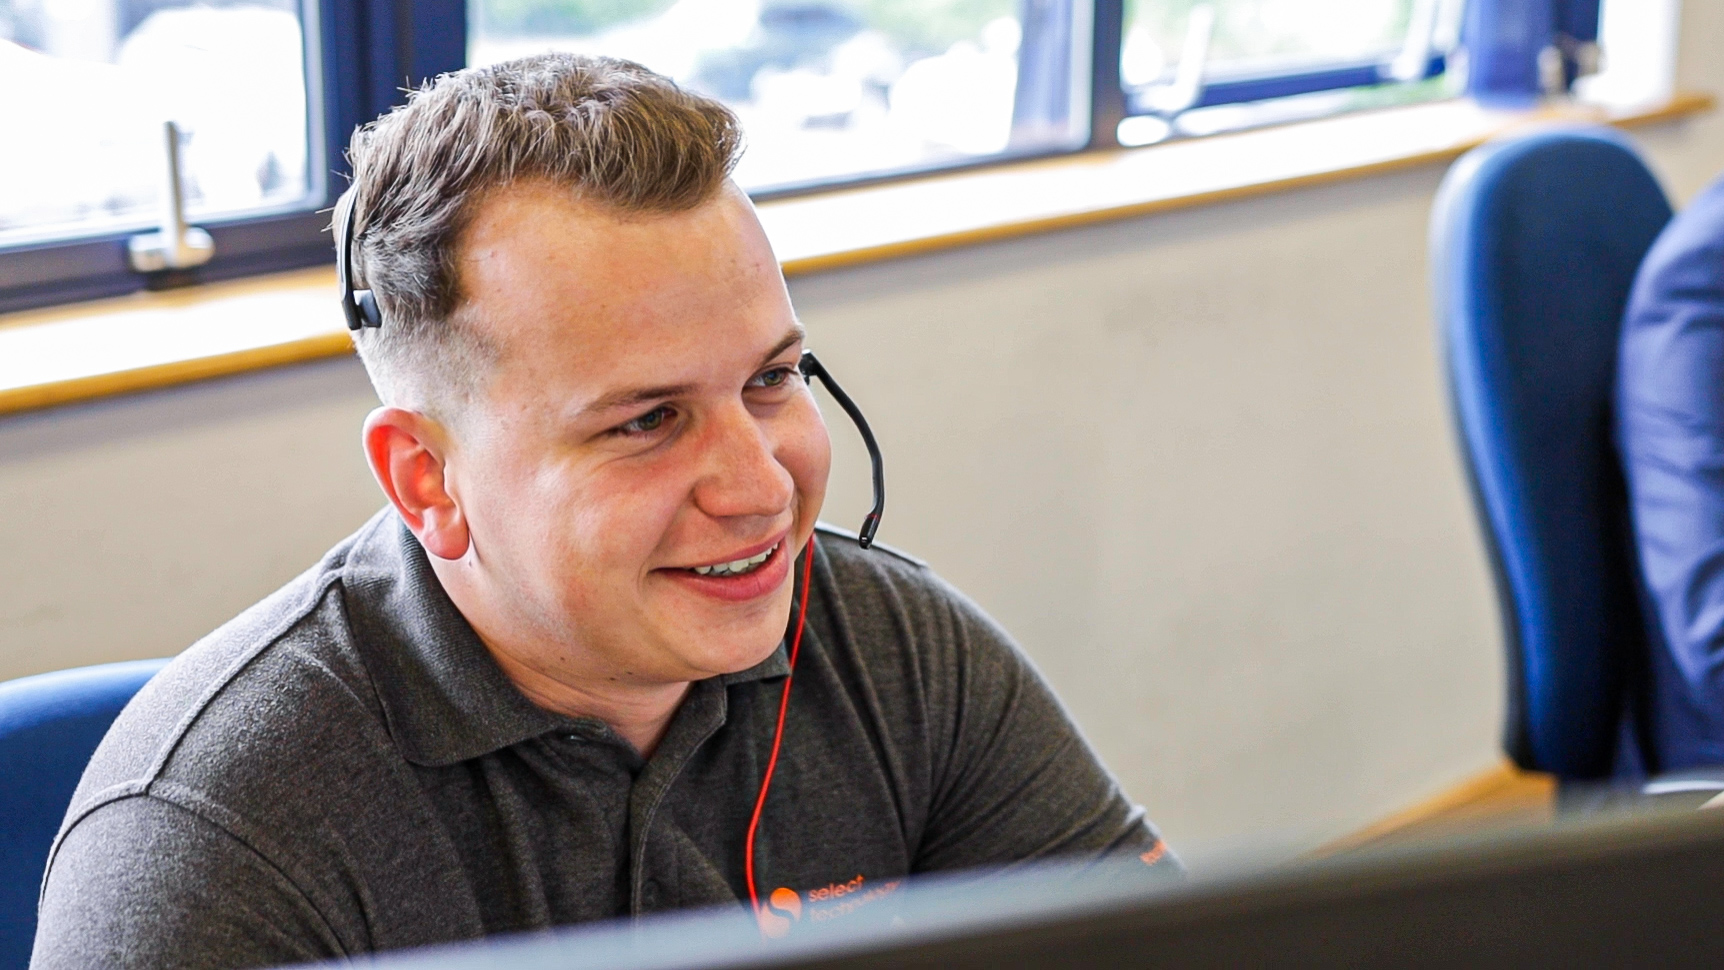 Join Select Technology's world-class Service Desk providing the very best IT support in Kent.